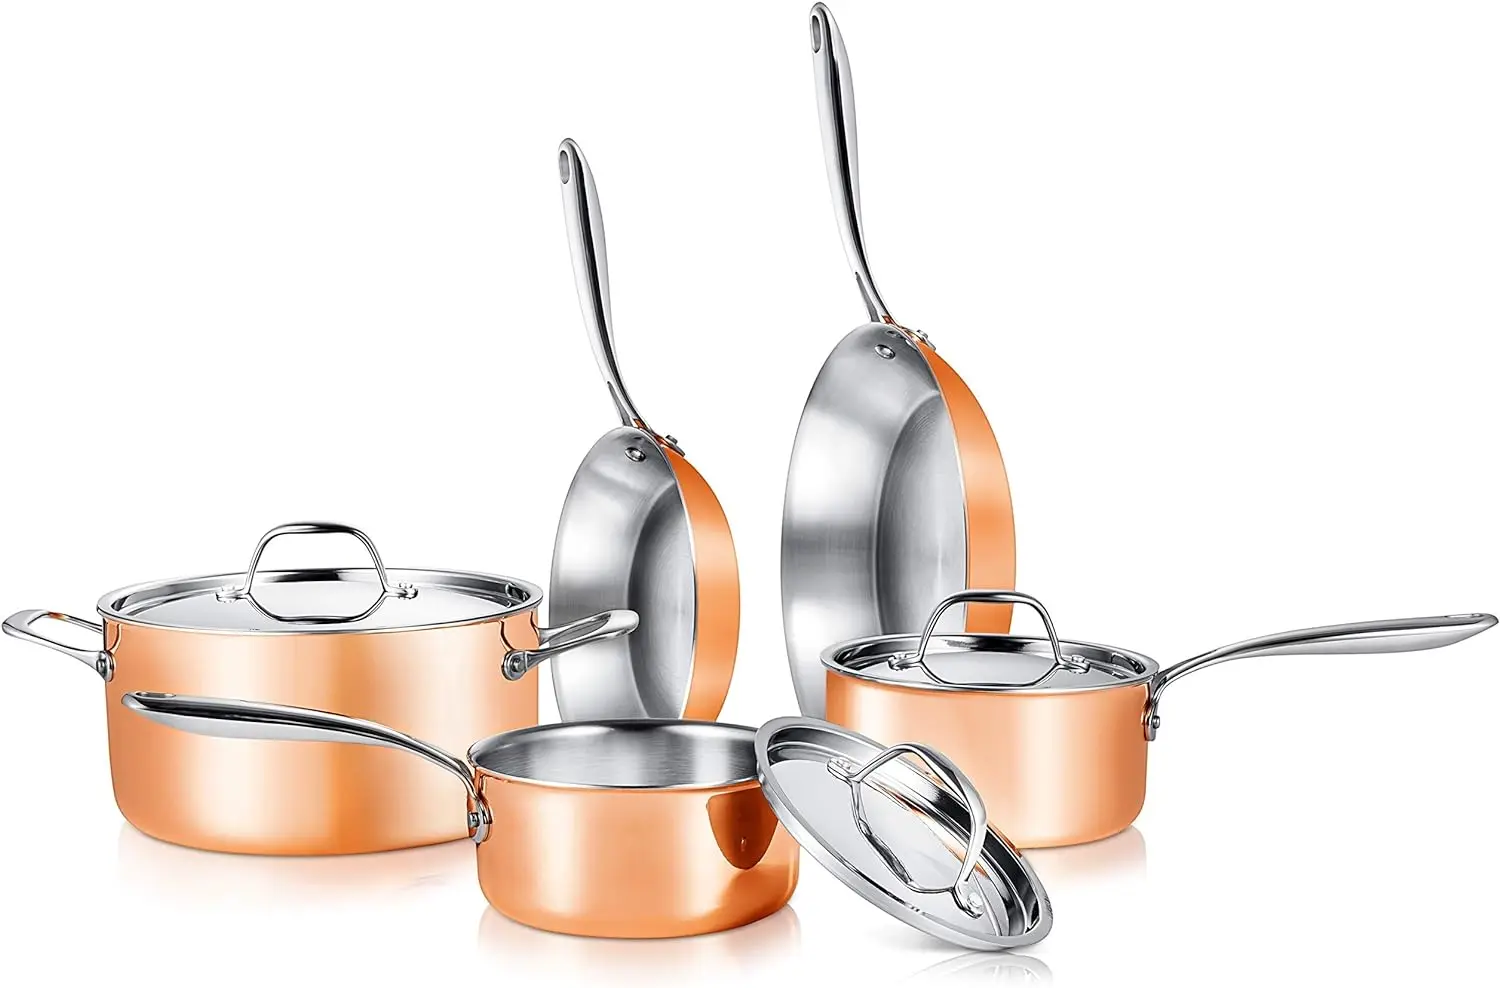 

Pcs. Stainless Steel Kitchenware Pots & Pans Set Stylish Kitchen Cookware w/Cast SS Handle, Tri-Ply Authentic Copper, for Sa Jue